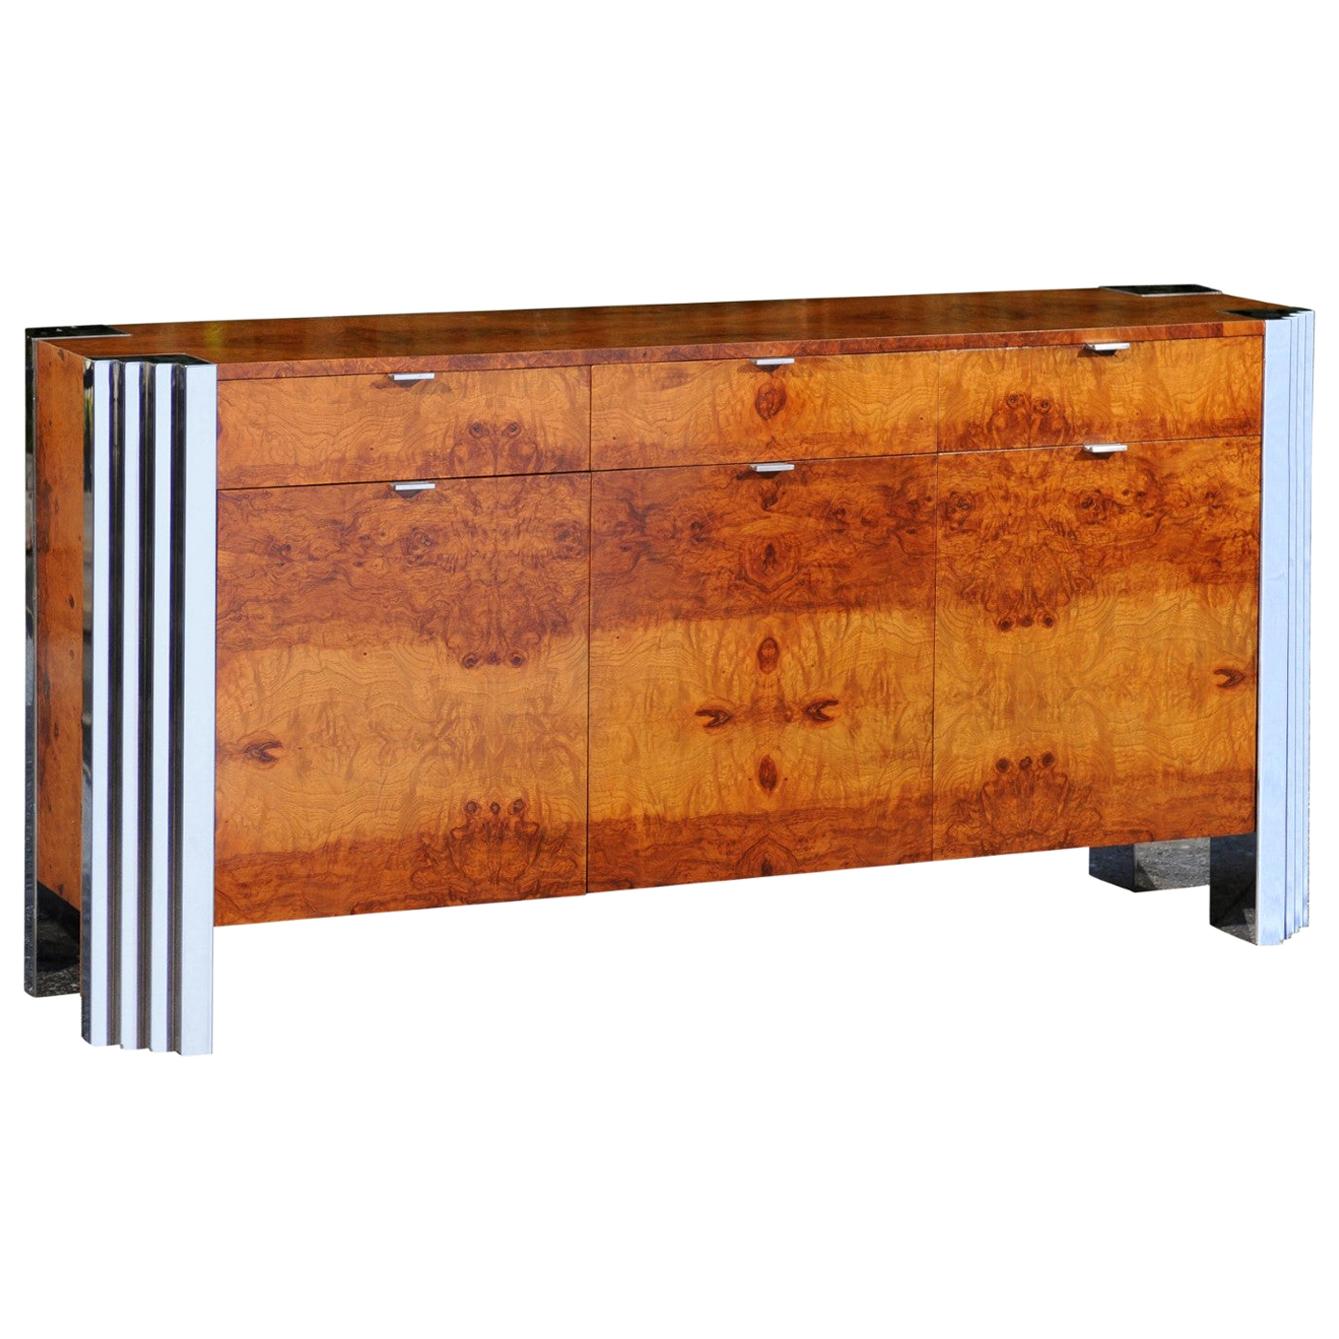 Magnificent Bookmatched Elm Cabinet in the style of Milo Baughman For Sale